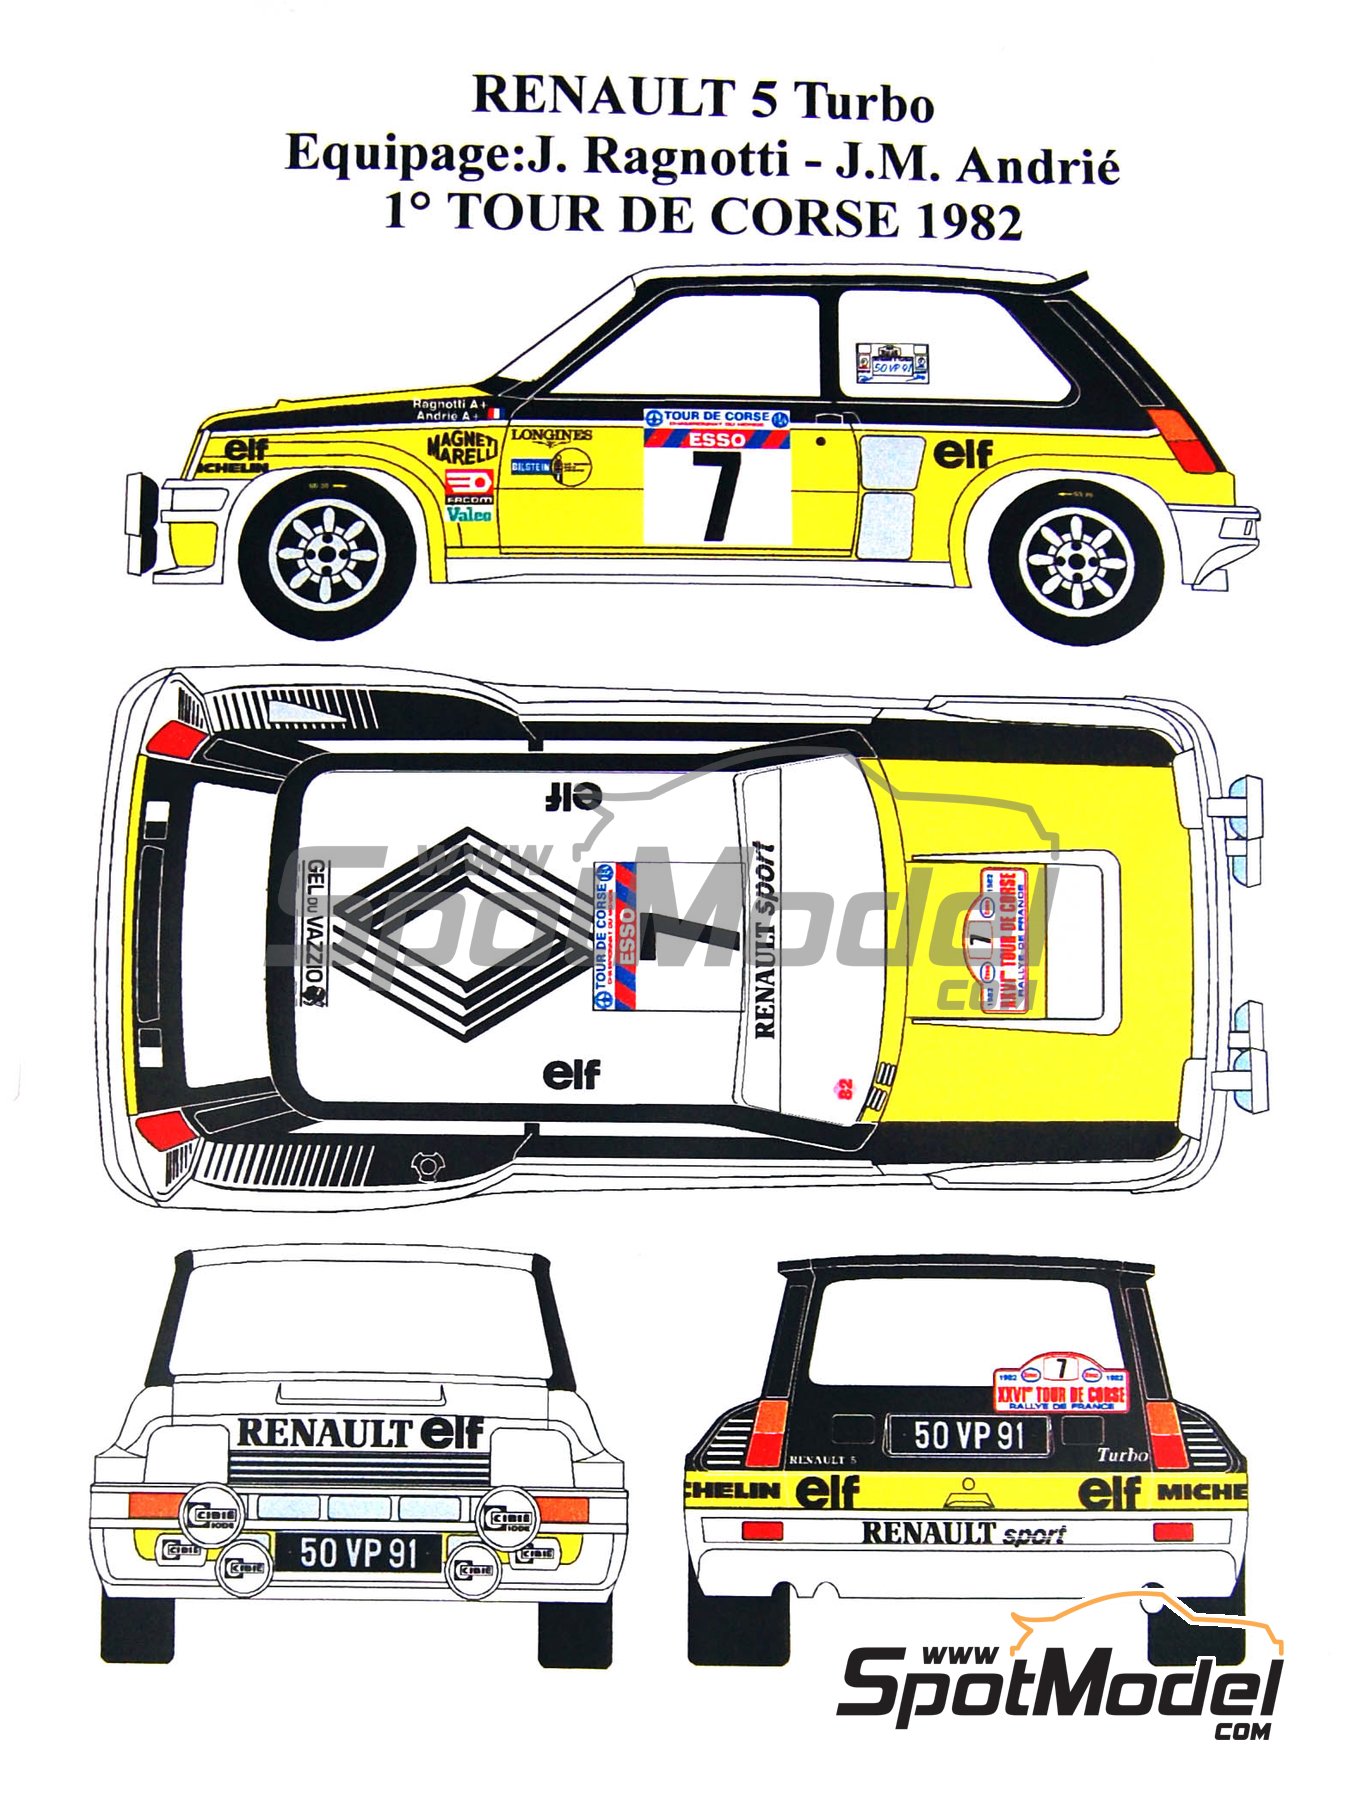 DECALS 1/18 REF 1521 RENAULT 5 TURBO POUDREL COUPE DE FRANCE RALLYE 1995 RALLY 